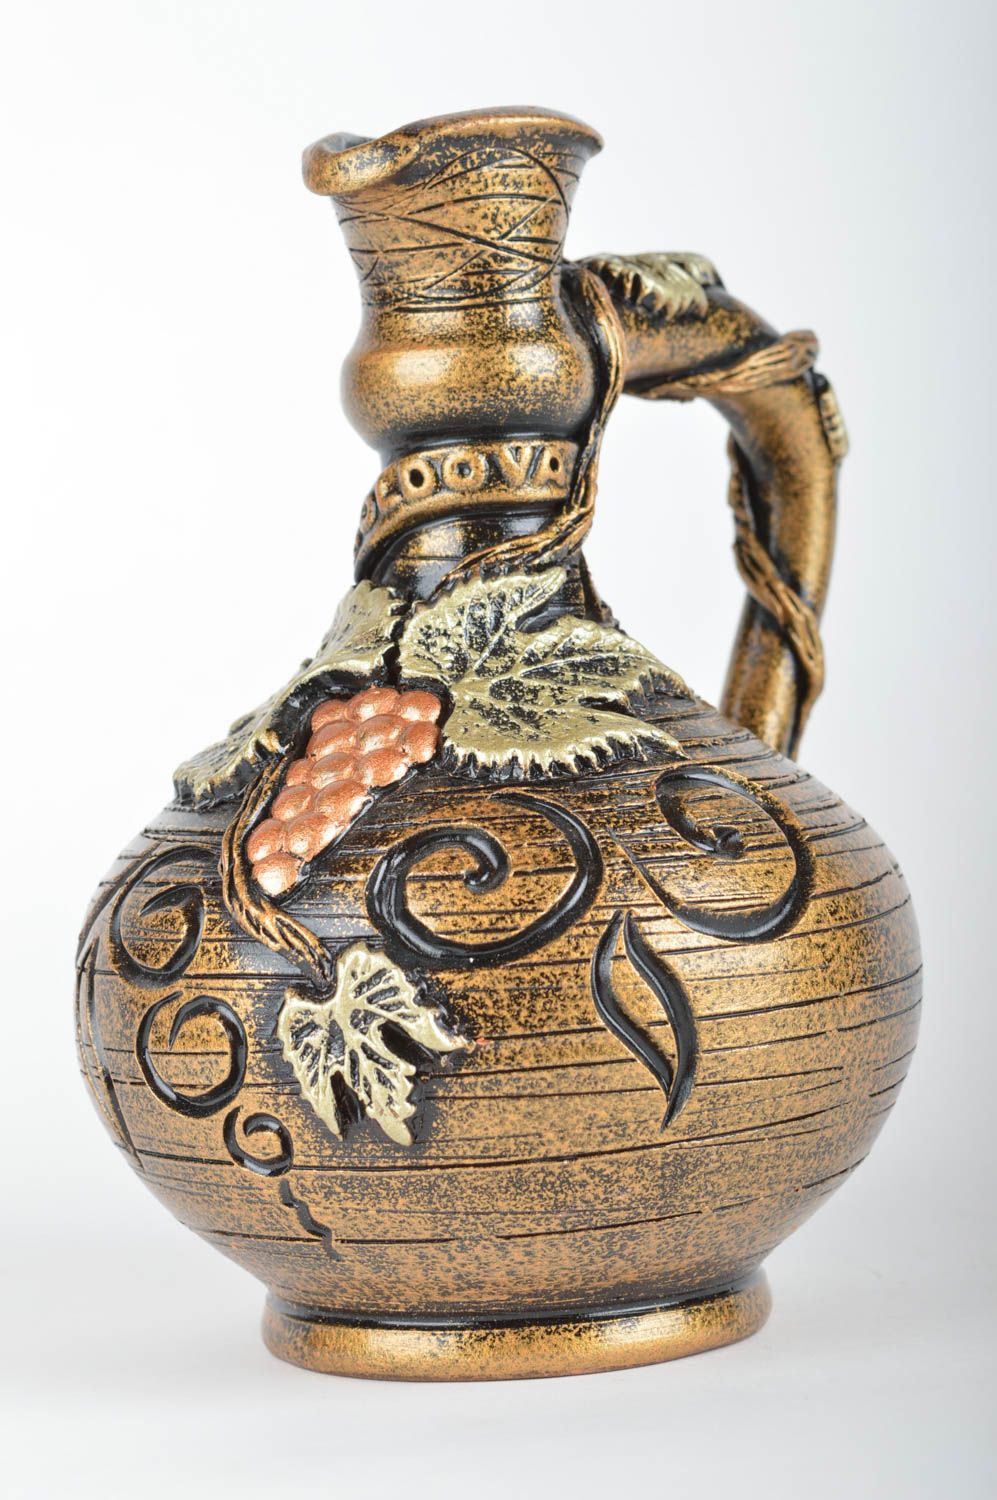 15 oz handmade ceramic wine decanter in gold color with handle and molded grapes 1,3 lb photo 2